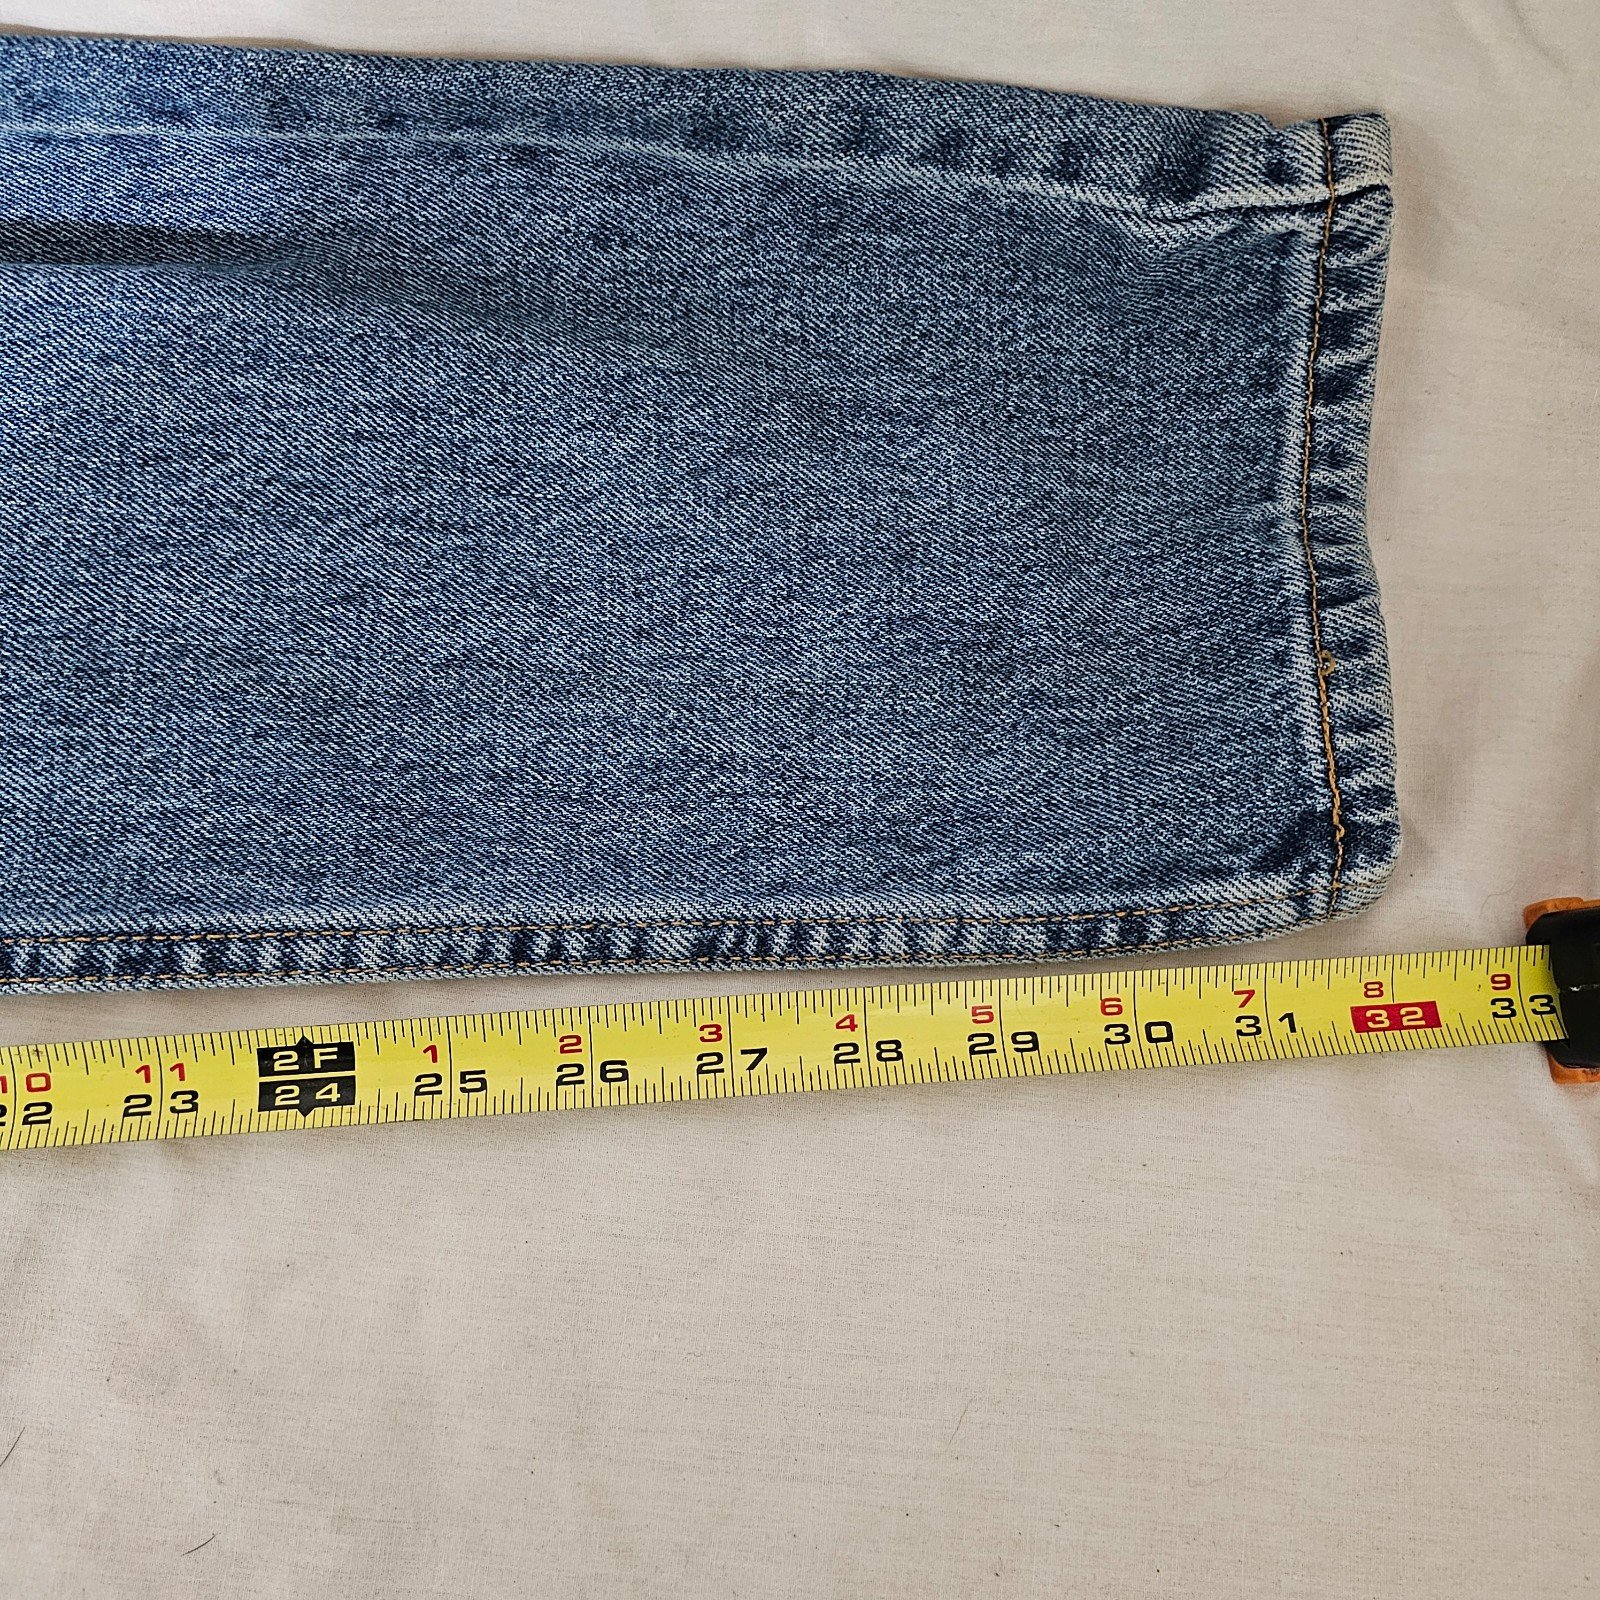 Authentic Vintage Levi´s Women´s 550 Relaxed Cut Tapered Leg Mom Denim Jeans 10L owKqRObwB Outlet Store